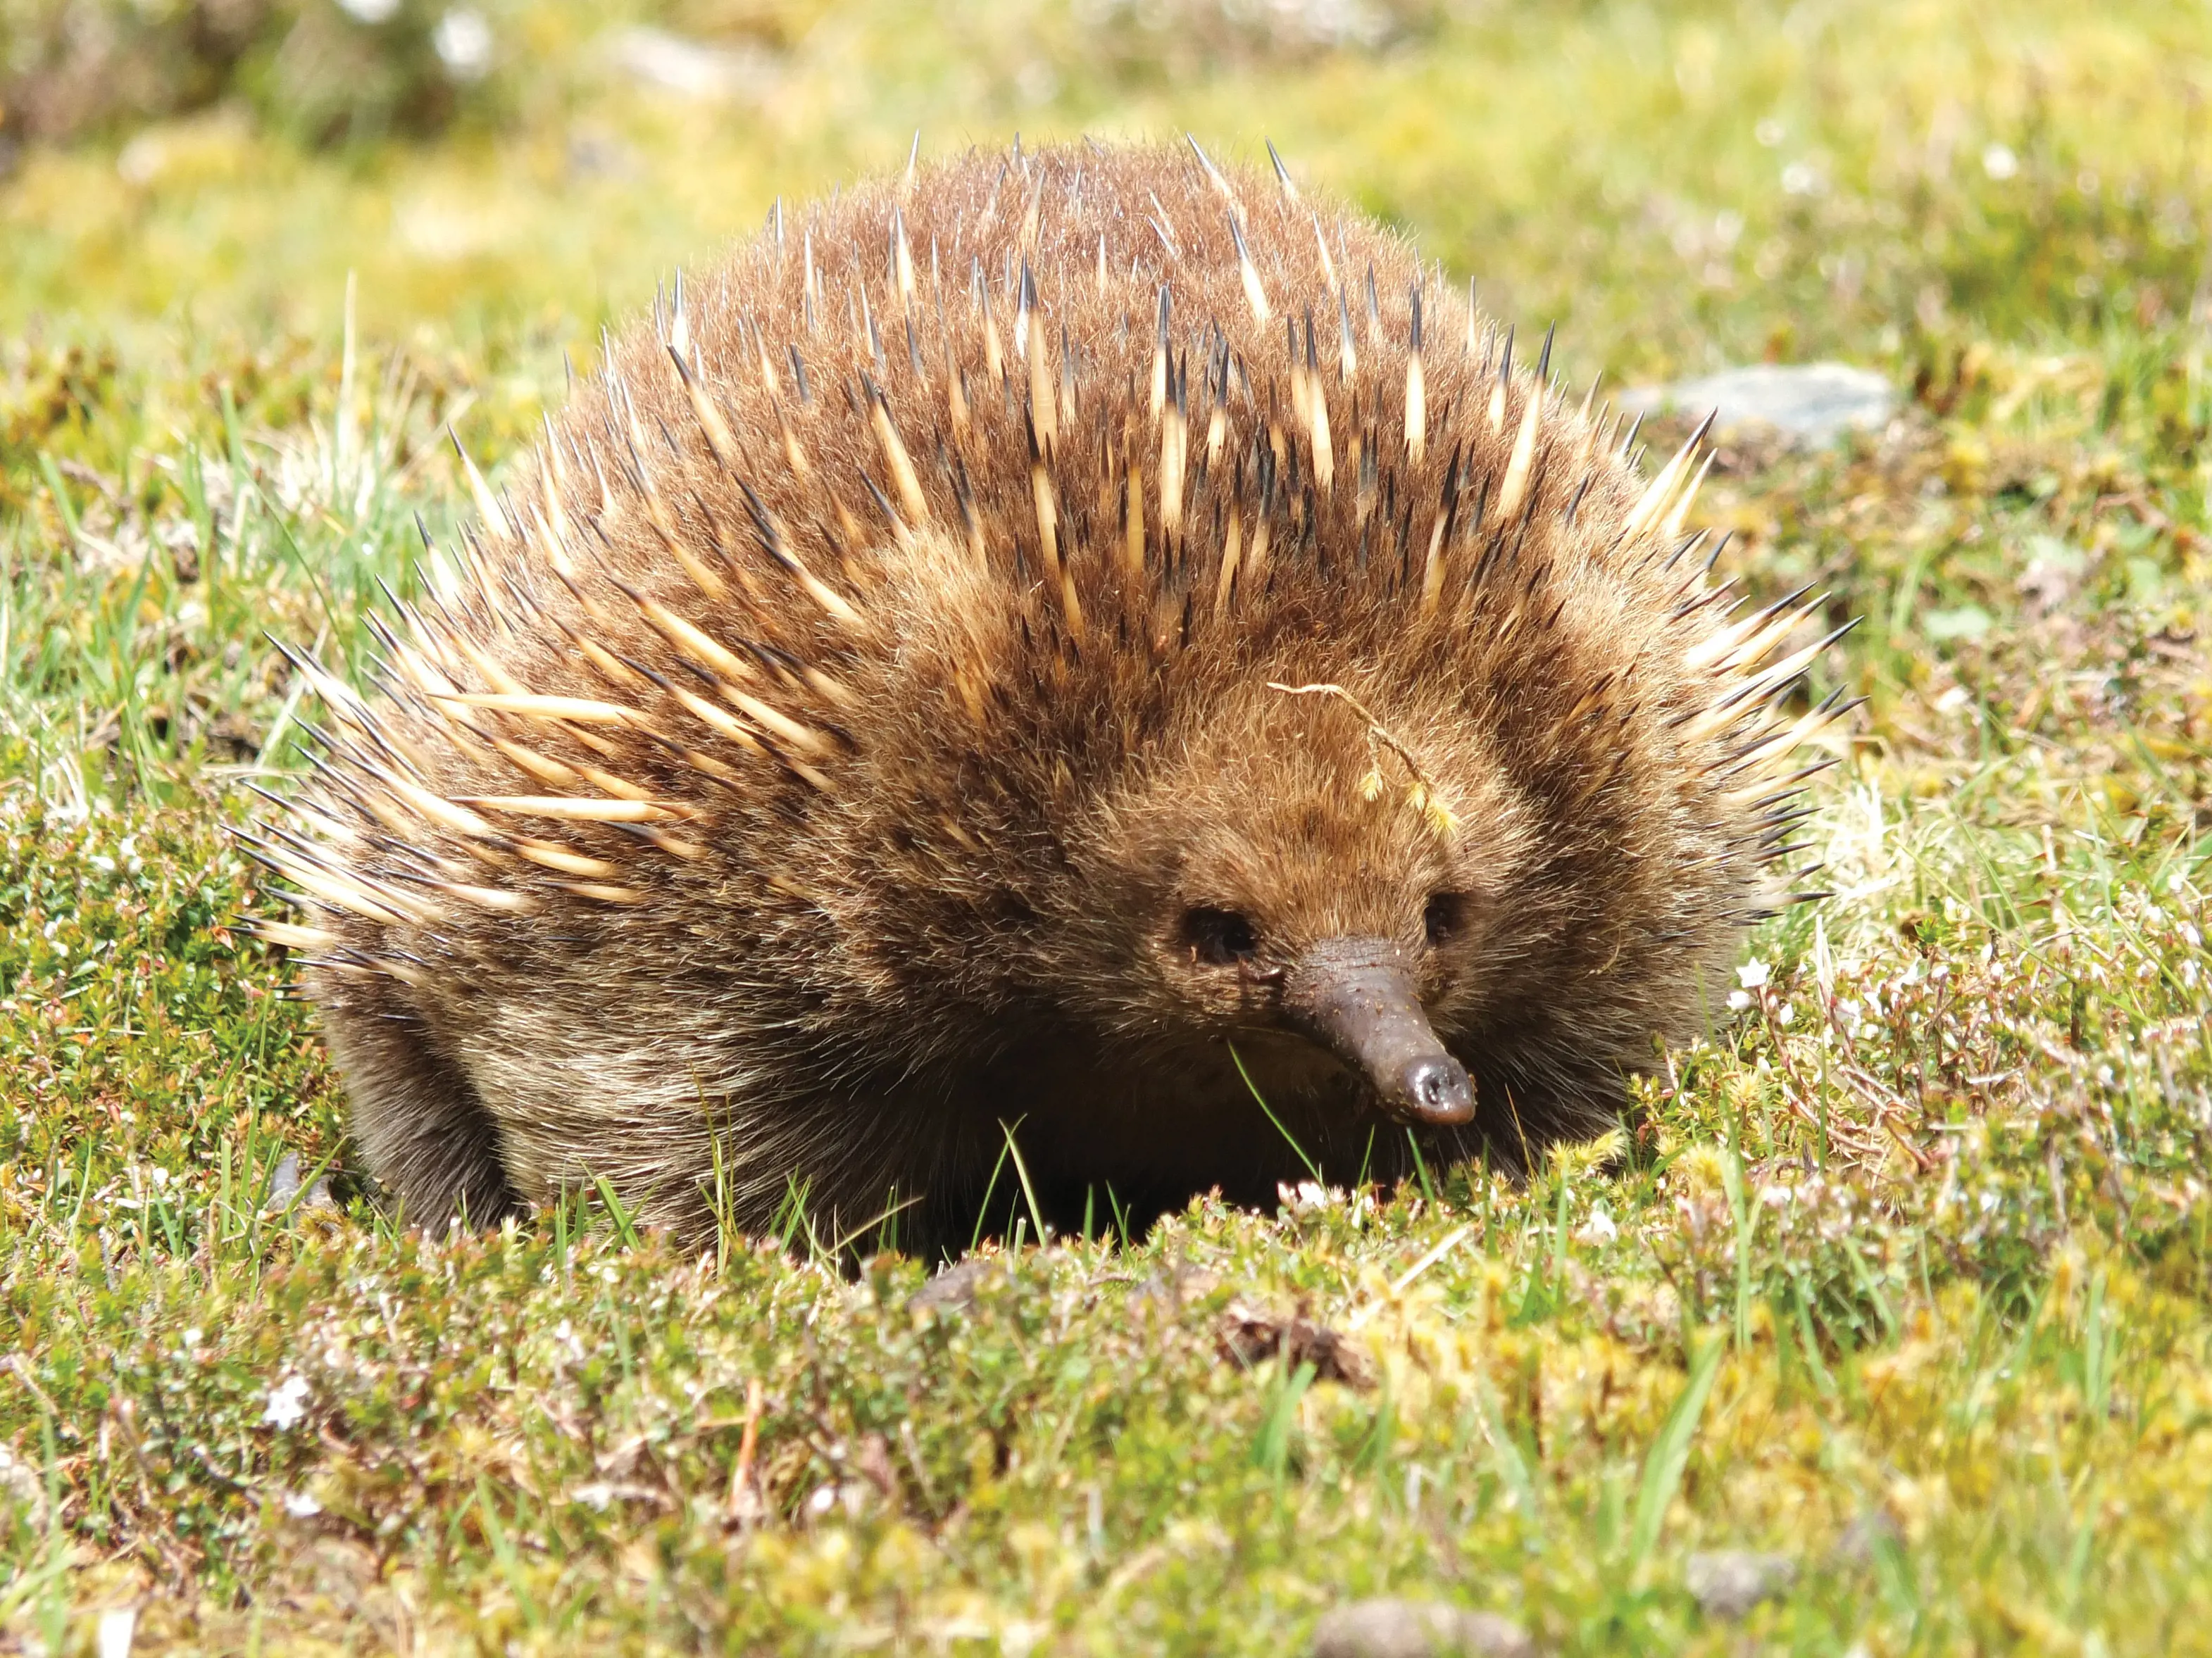 Close up of a Echidna at Cradle Mountain.